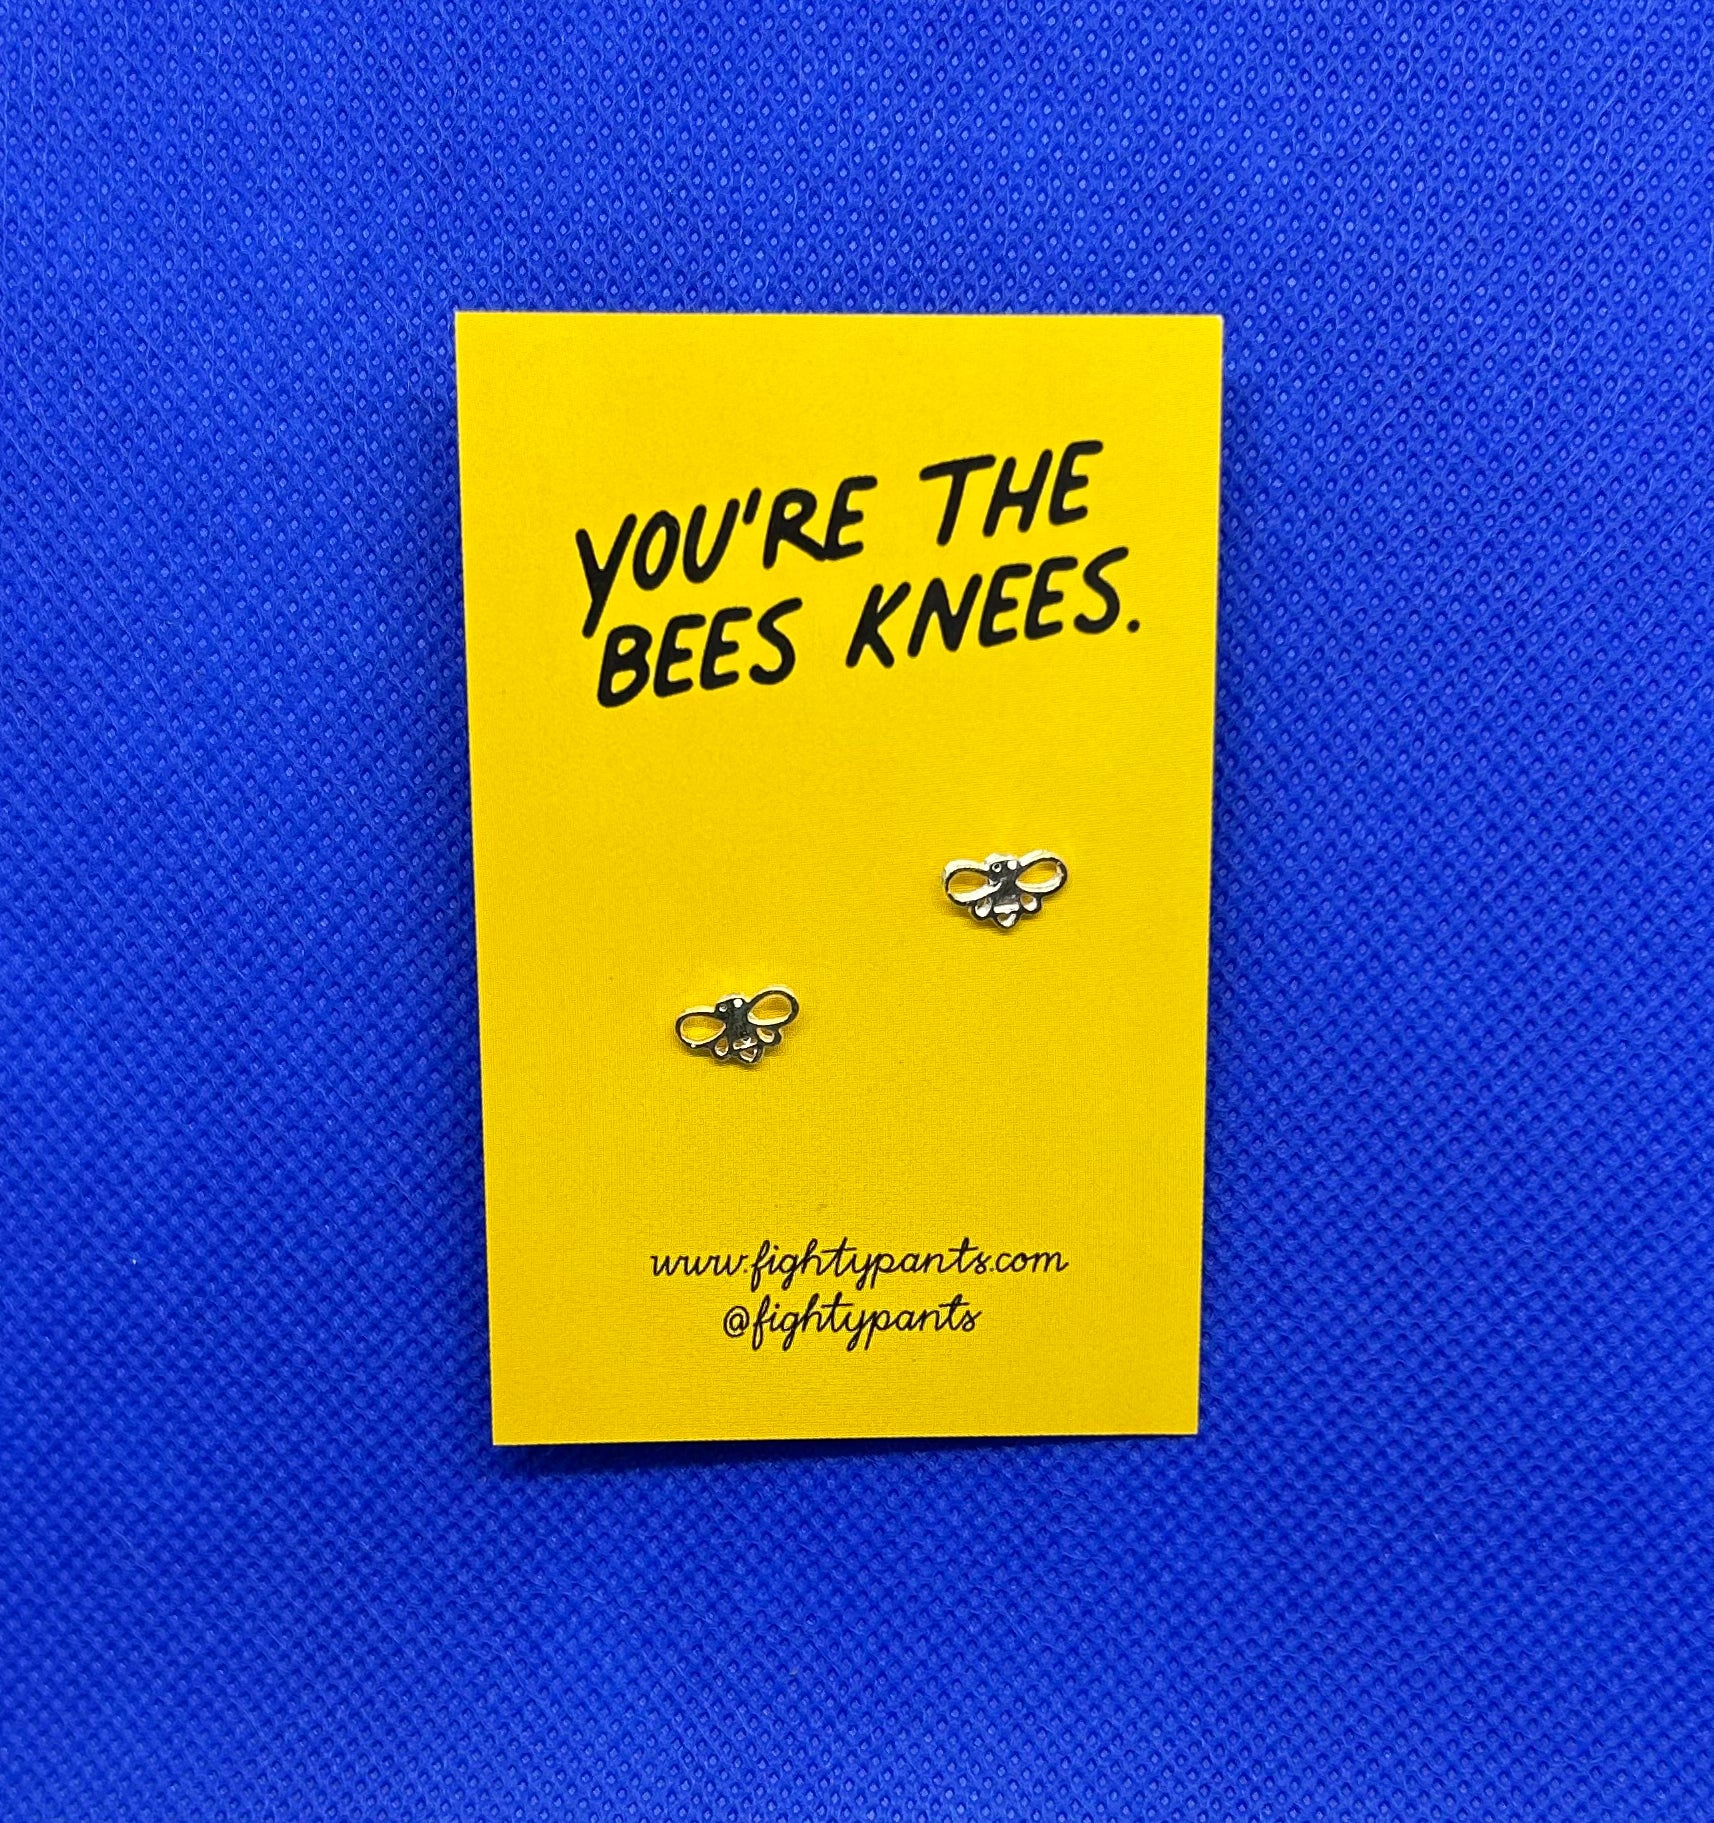 You’re the bees knees